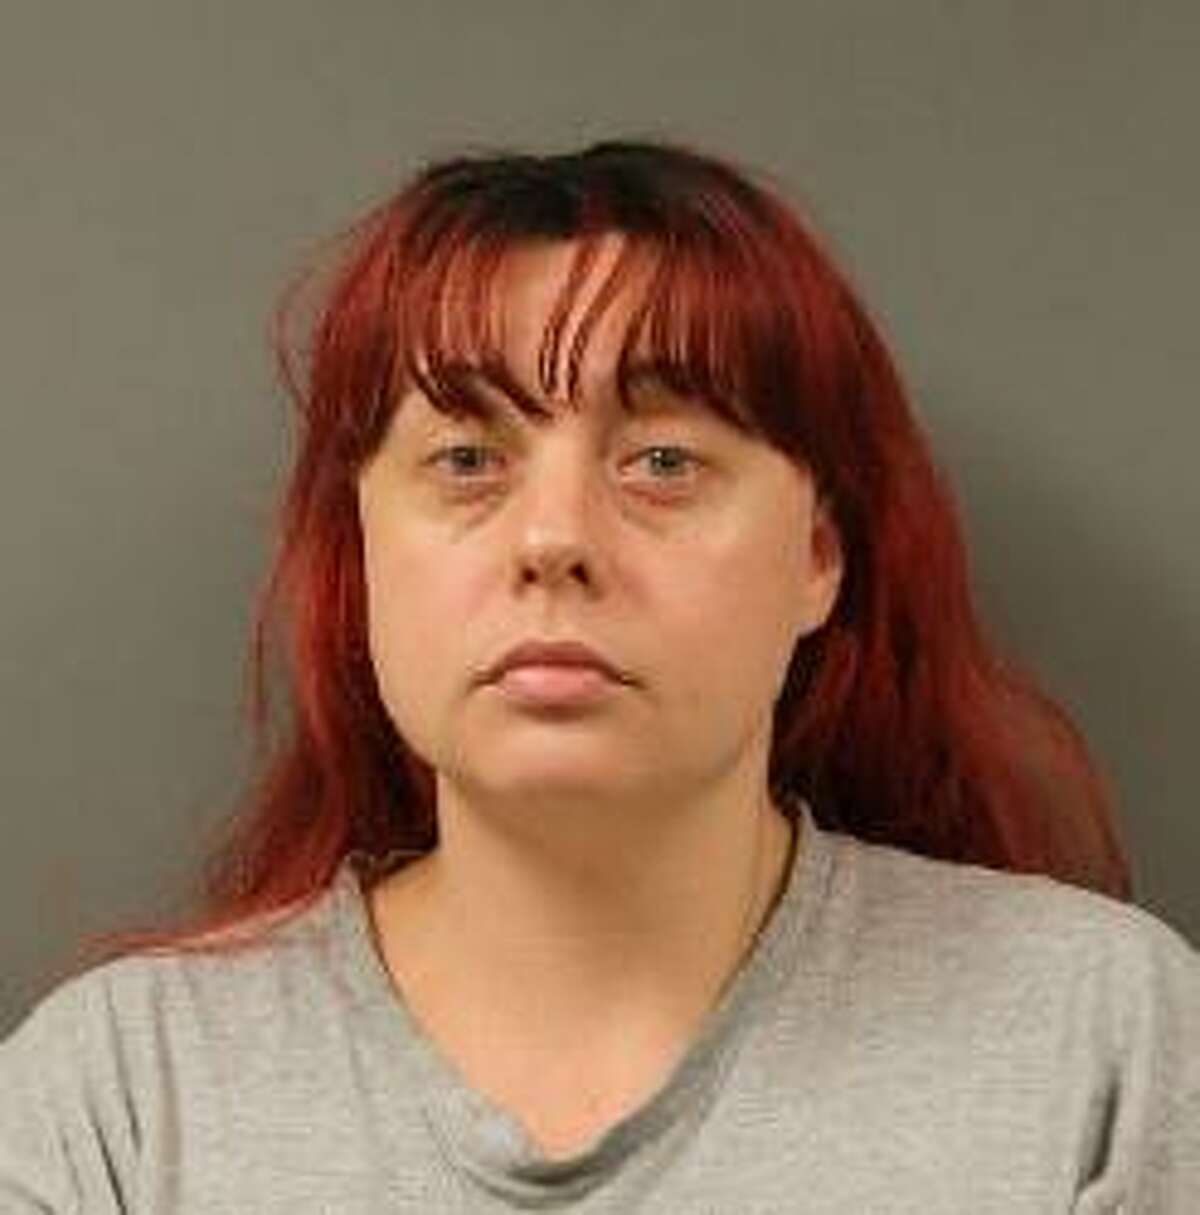 Amber Keyes is charged with injury to a child-serious bodily injury in the 176th State District Court.